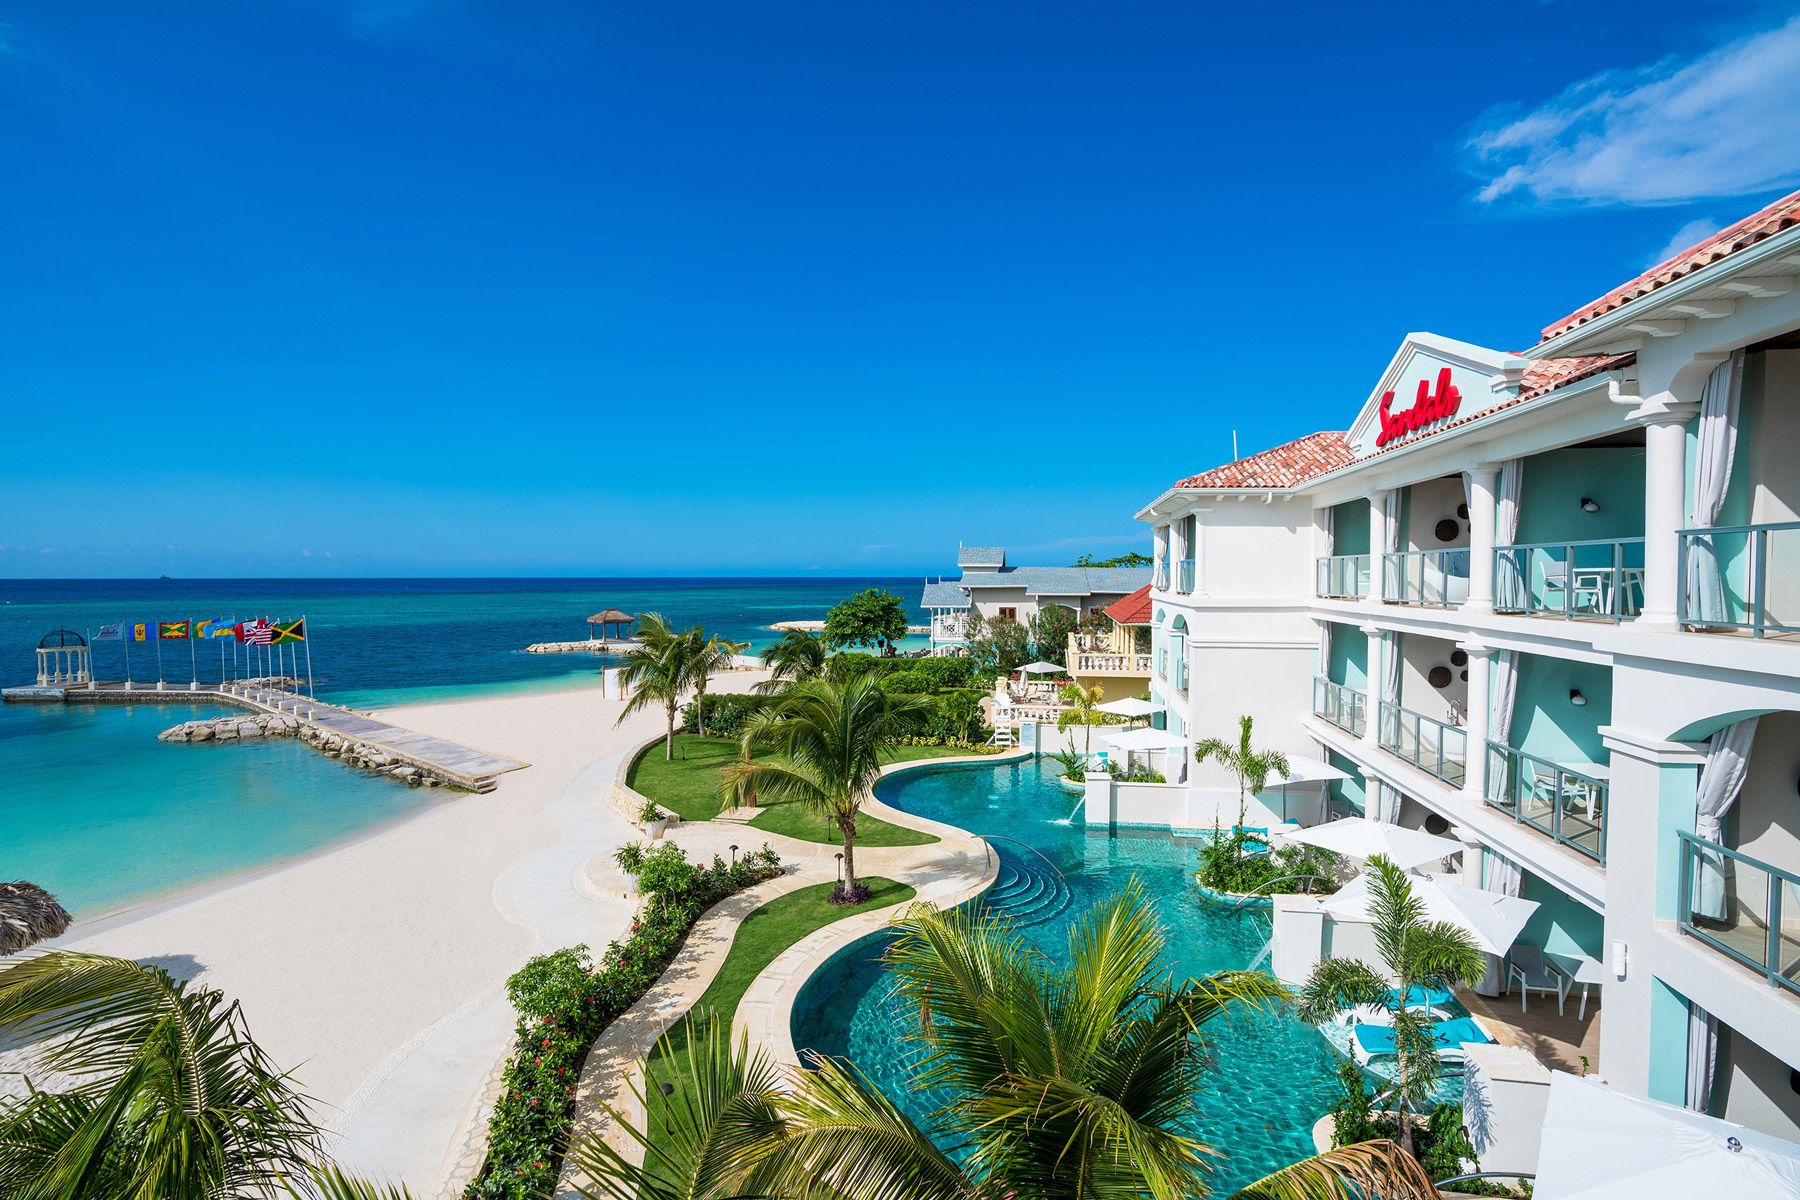 Three things guests love about... Sandals Montego Bay. A full review.